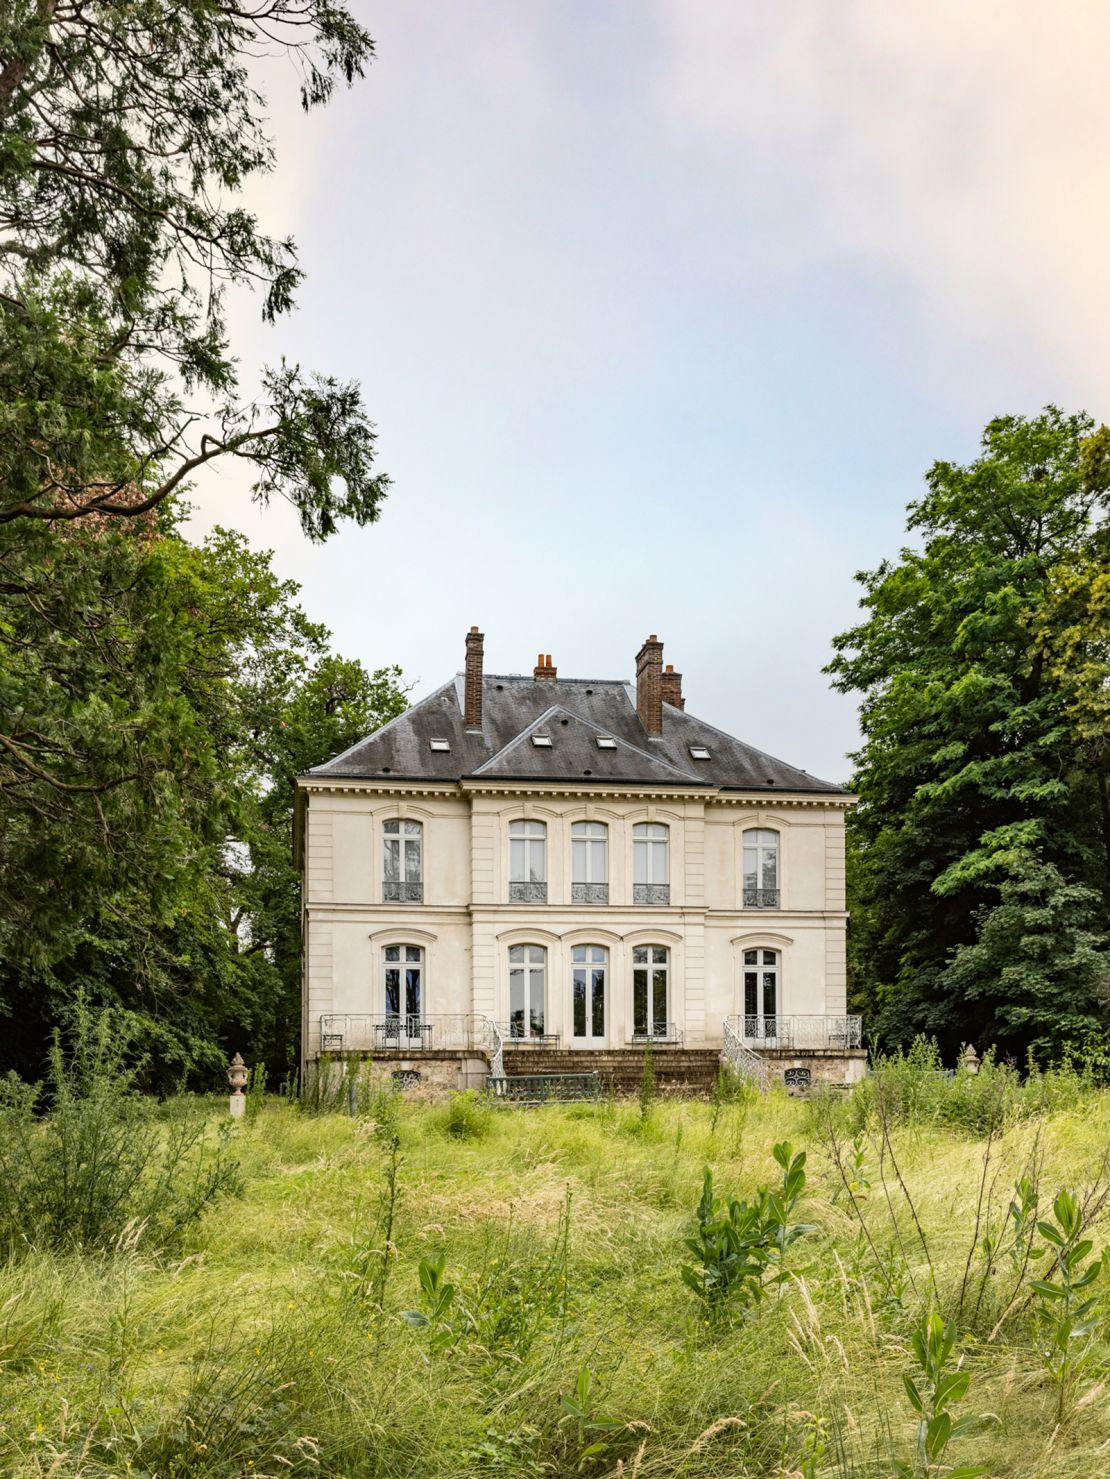 The neoclassical Pavillon de Voisins, an escape in the country which Lagerfeld christened the "Villa Louveciennes," was built in the mid-19th century. Lagerfeld purchased the home in 2009.